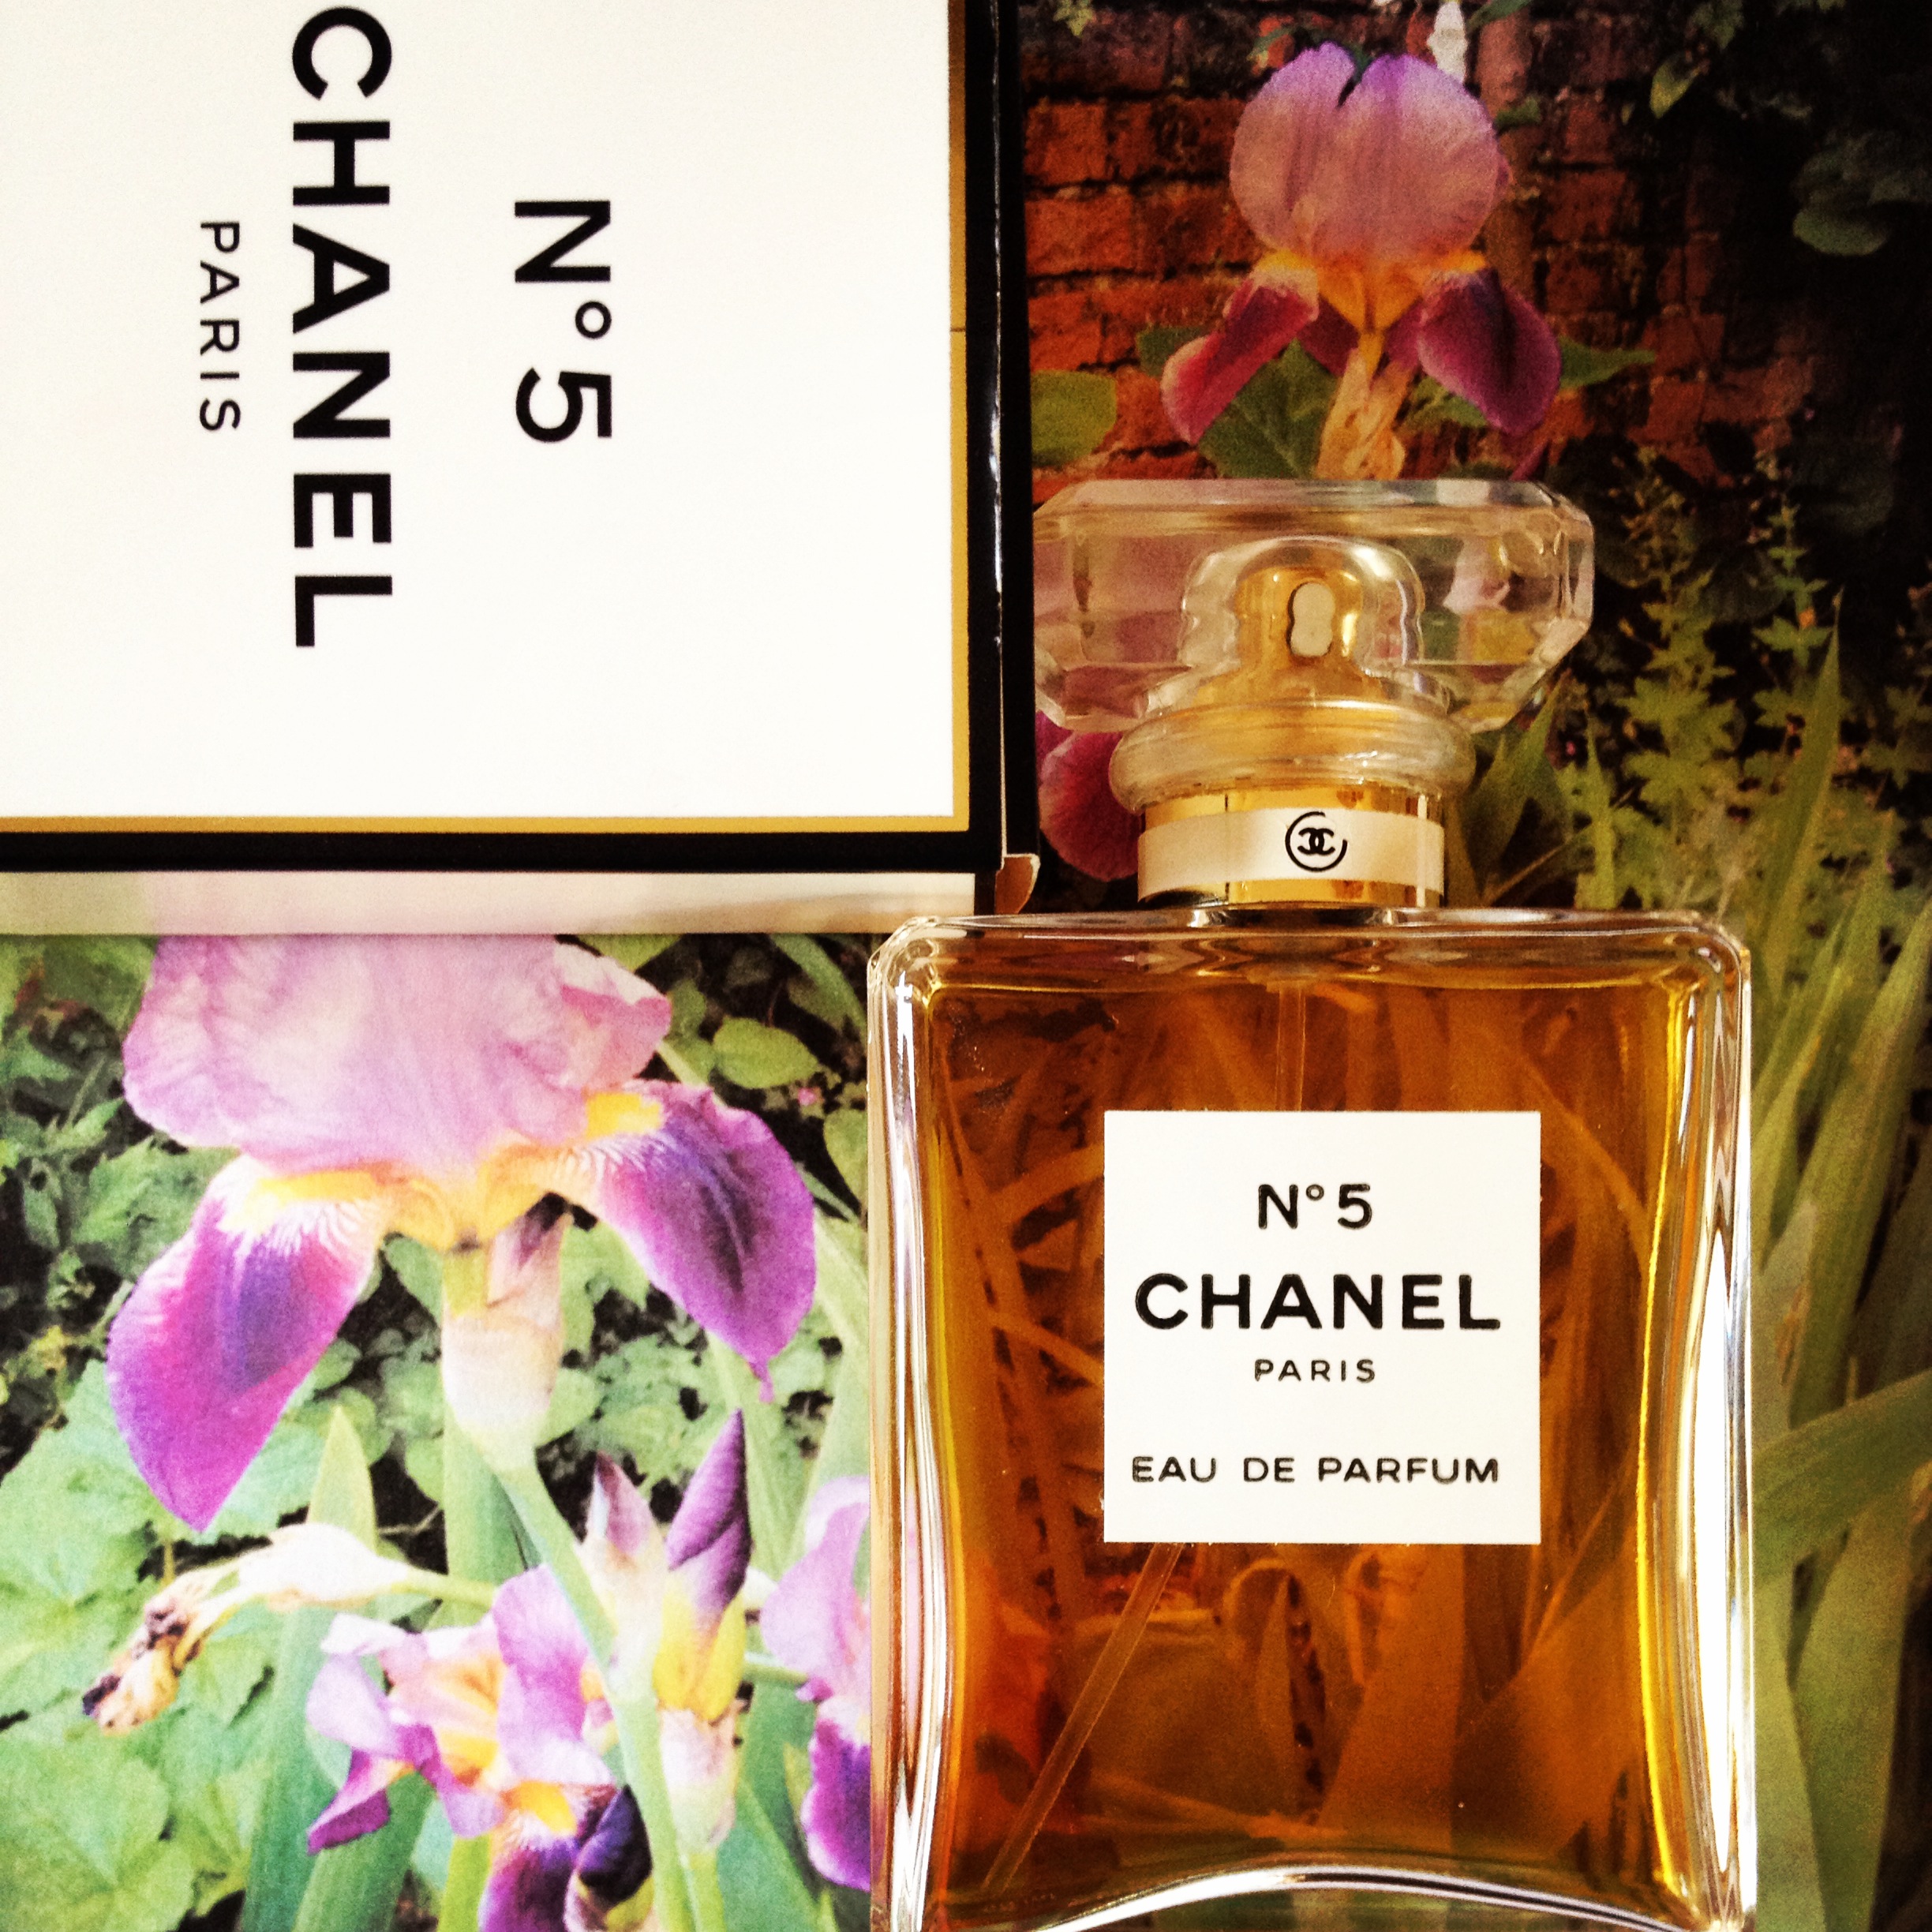 Chanel No5 Notes Online, 53% OFF 